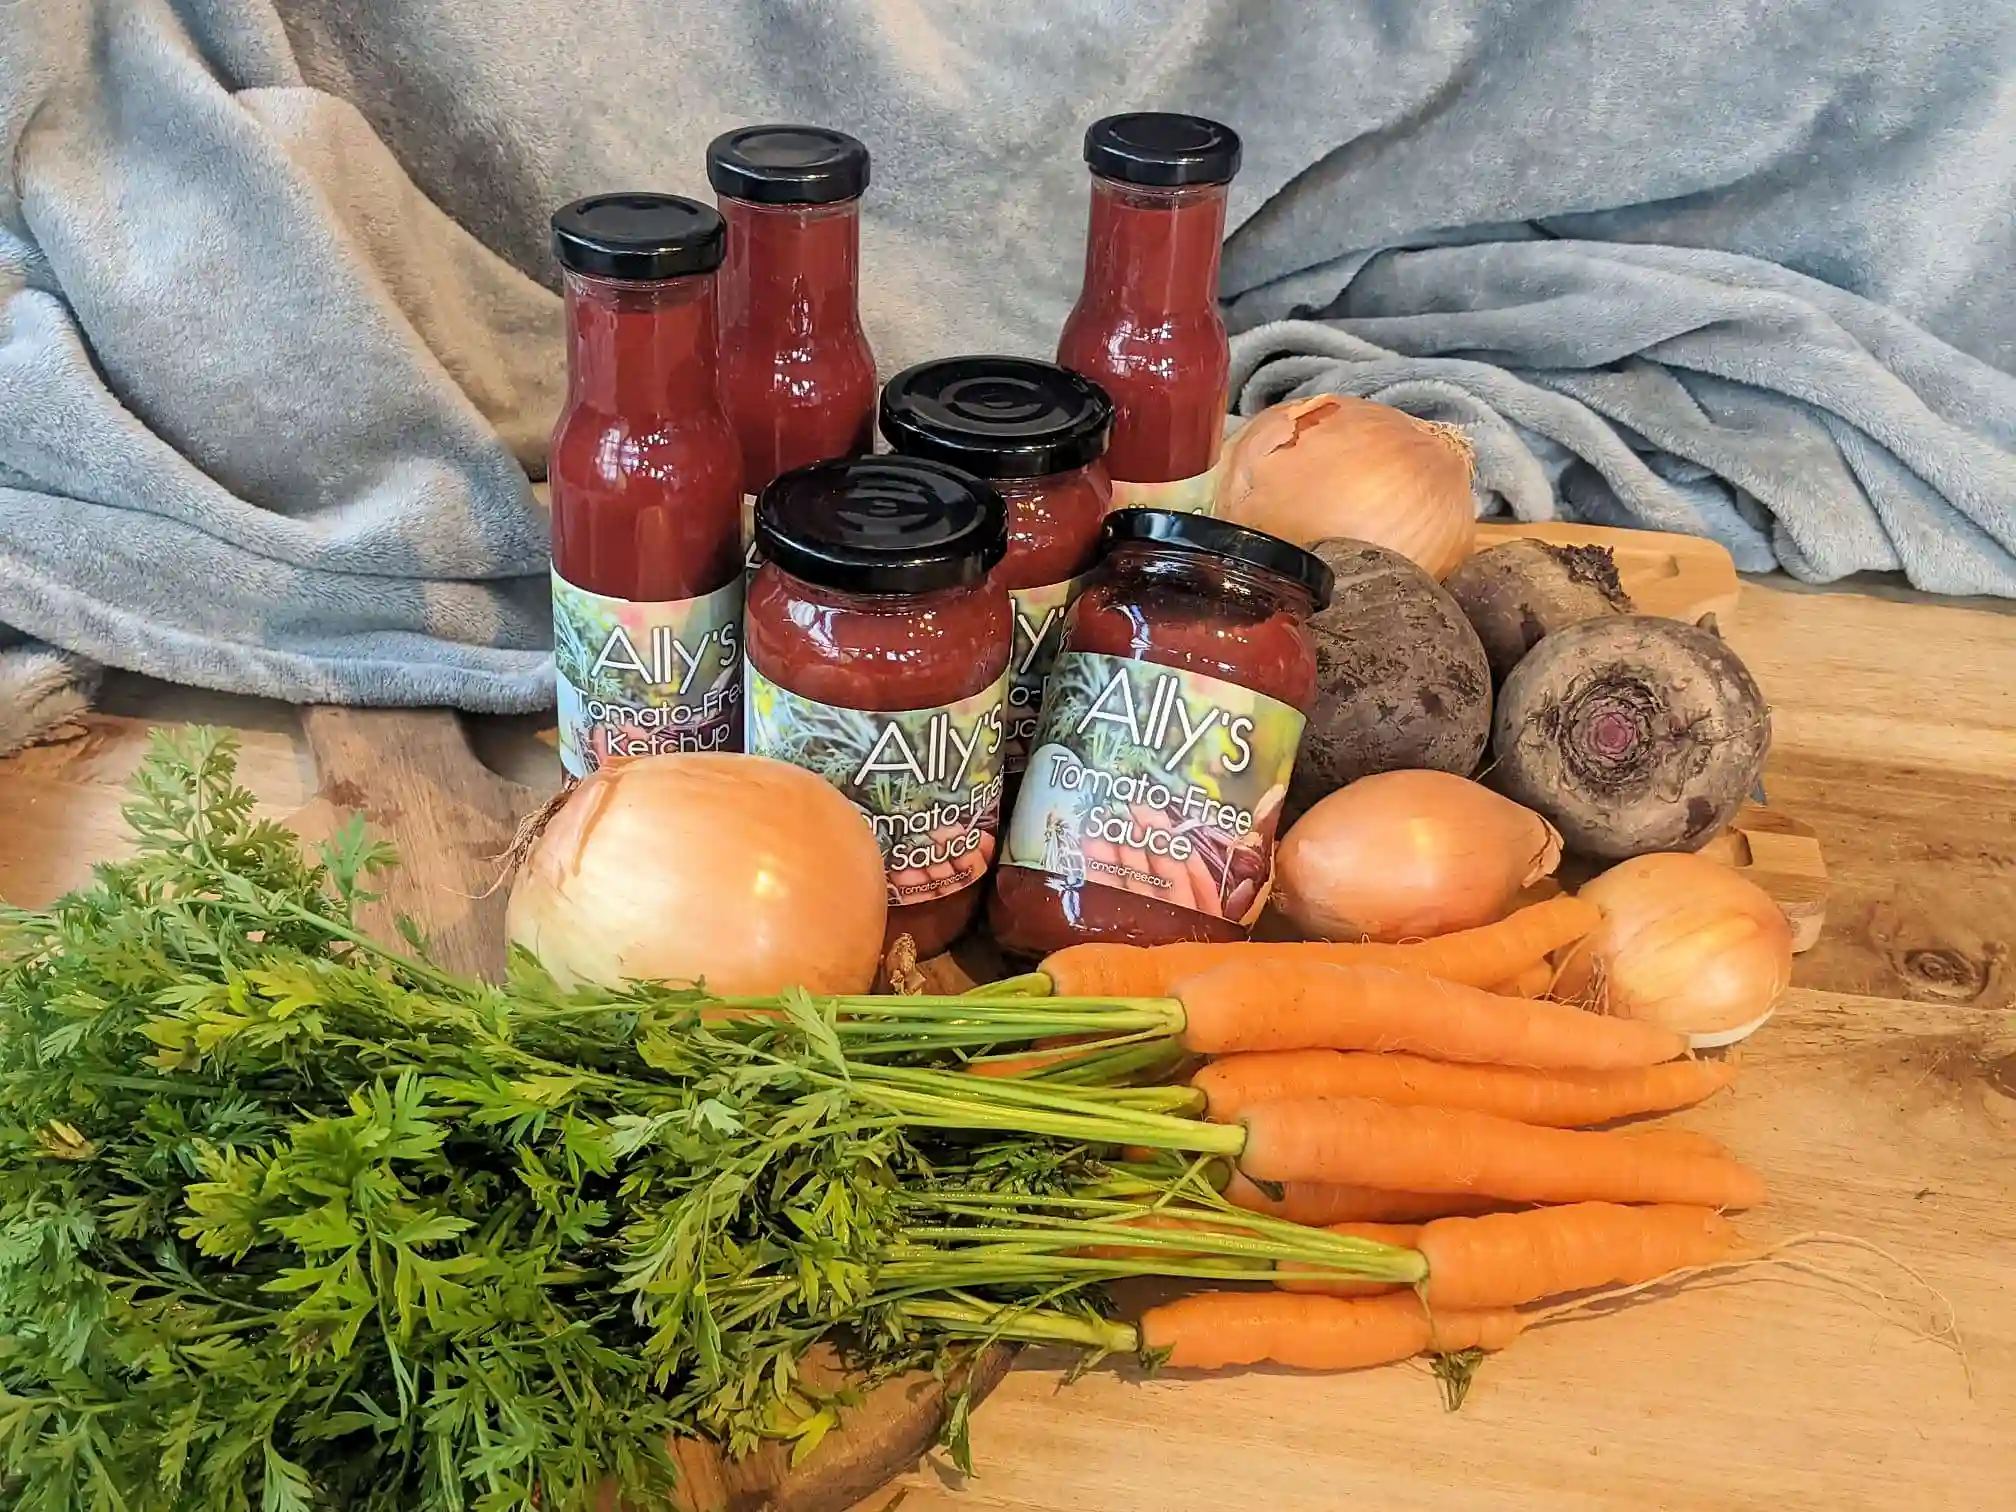 Tomato-free sauces and ketchup surrounded by wholesome vegetables